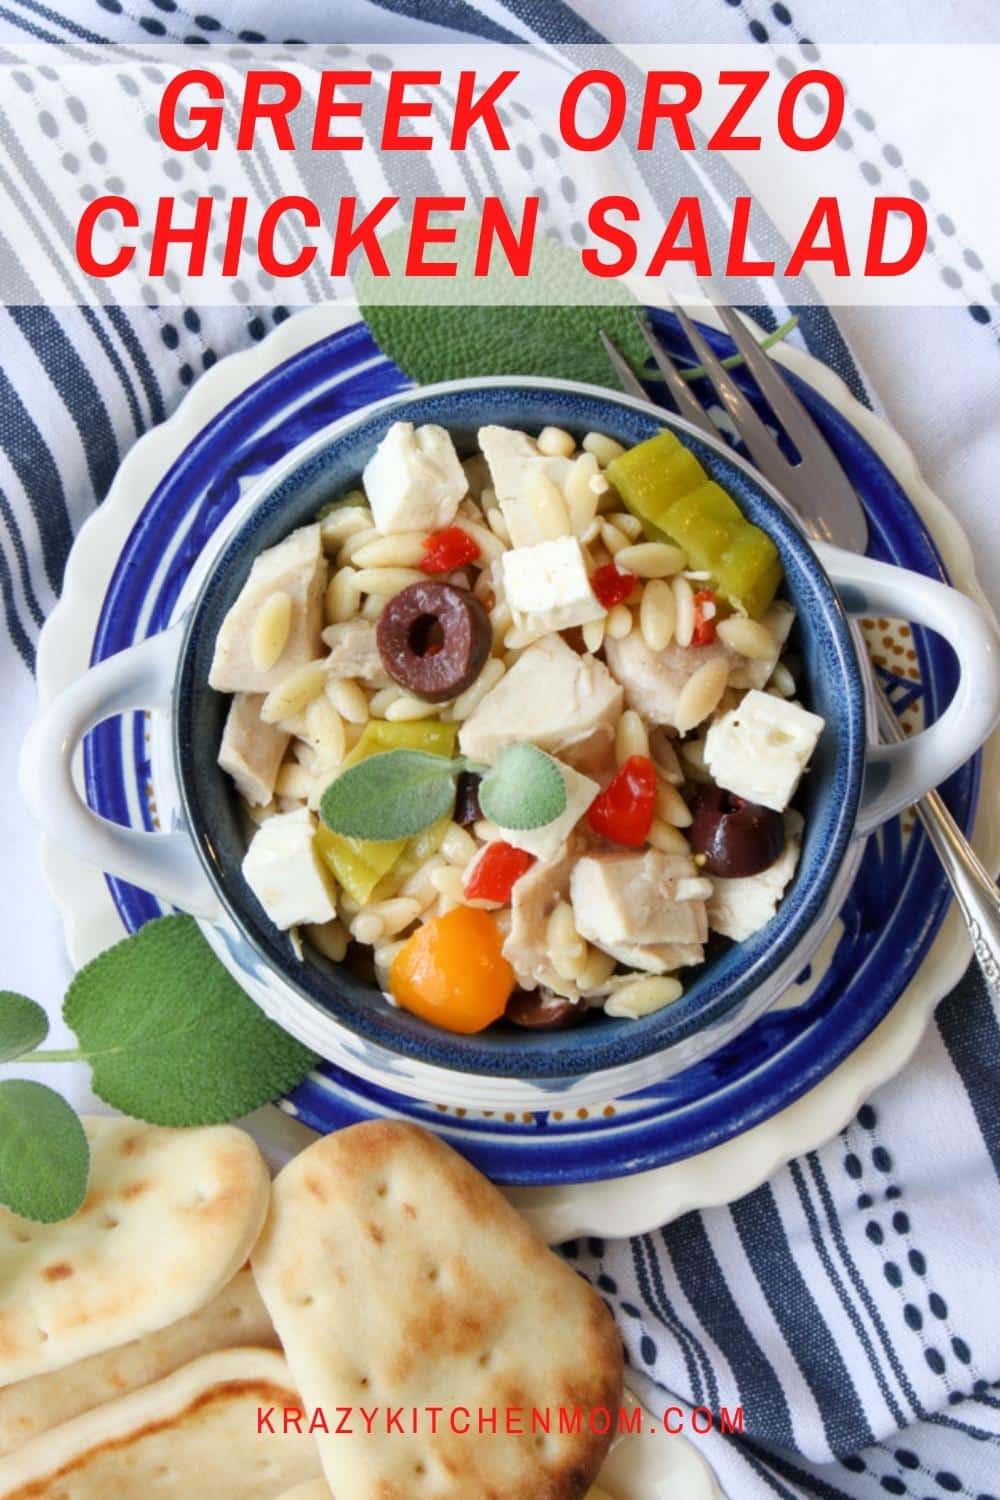 A tasty change to traditional pasta salad. Made with rotisserie chicken, fresh veggies, feta cheese, and spices, tossed in a bright dressing. via @krazykitchenmom